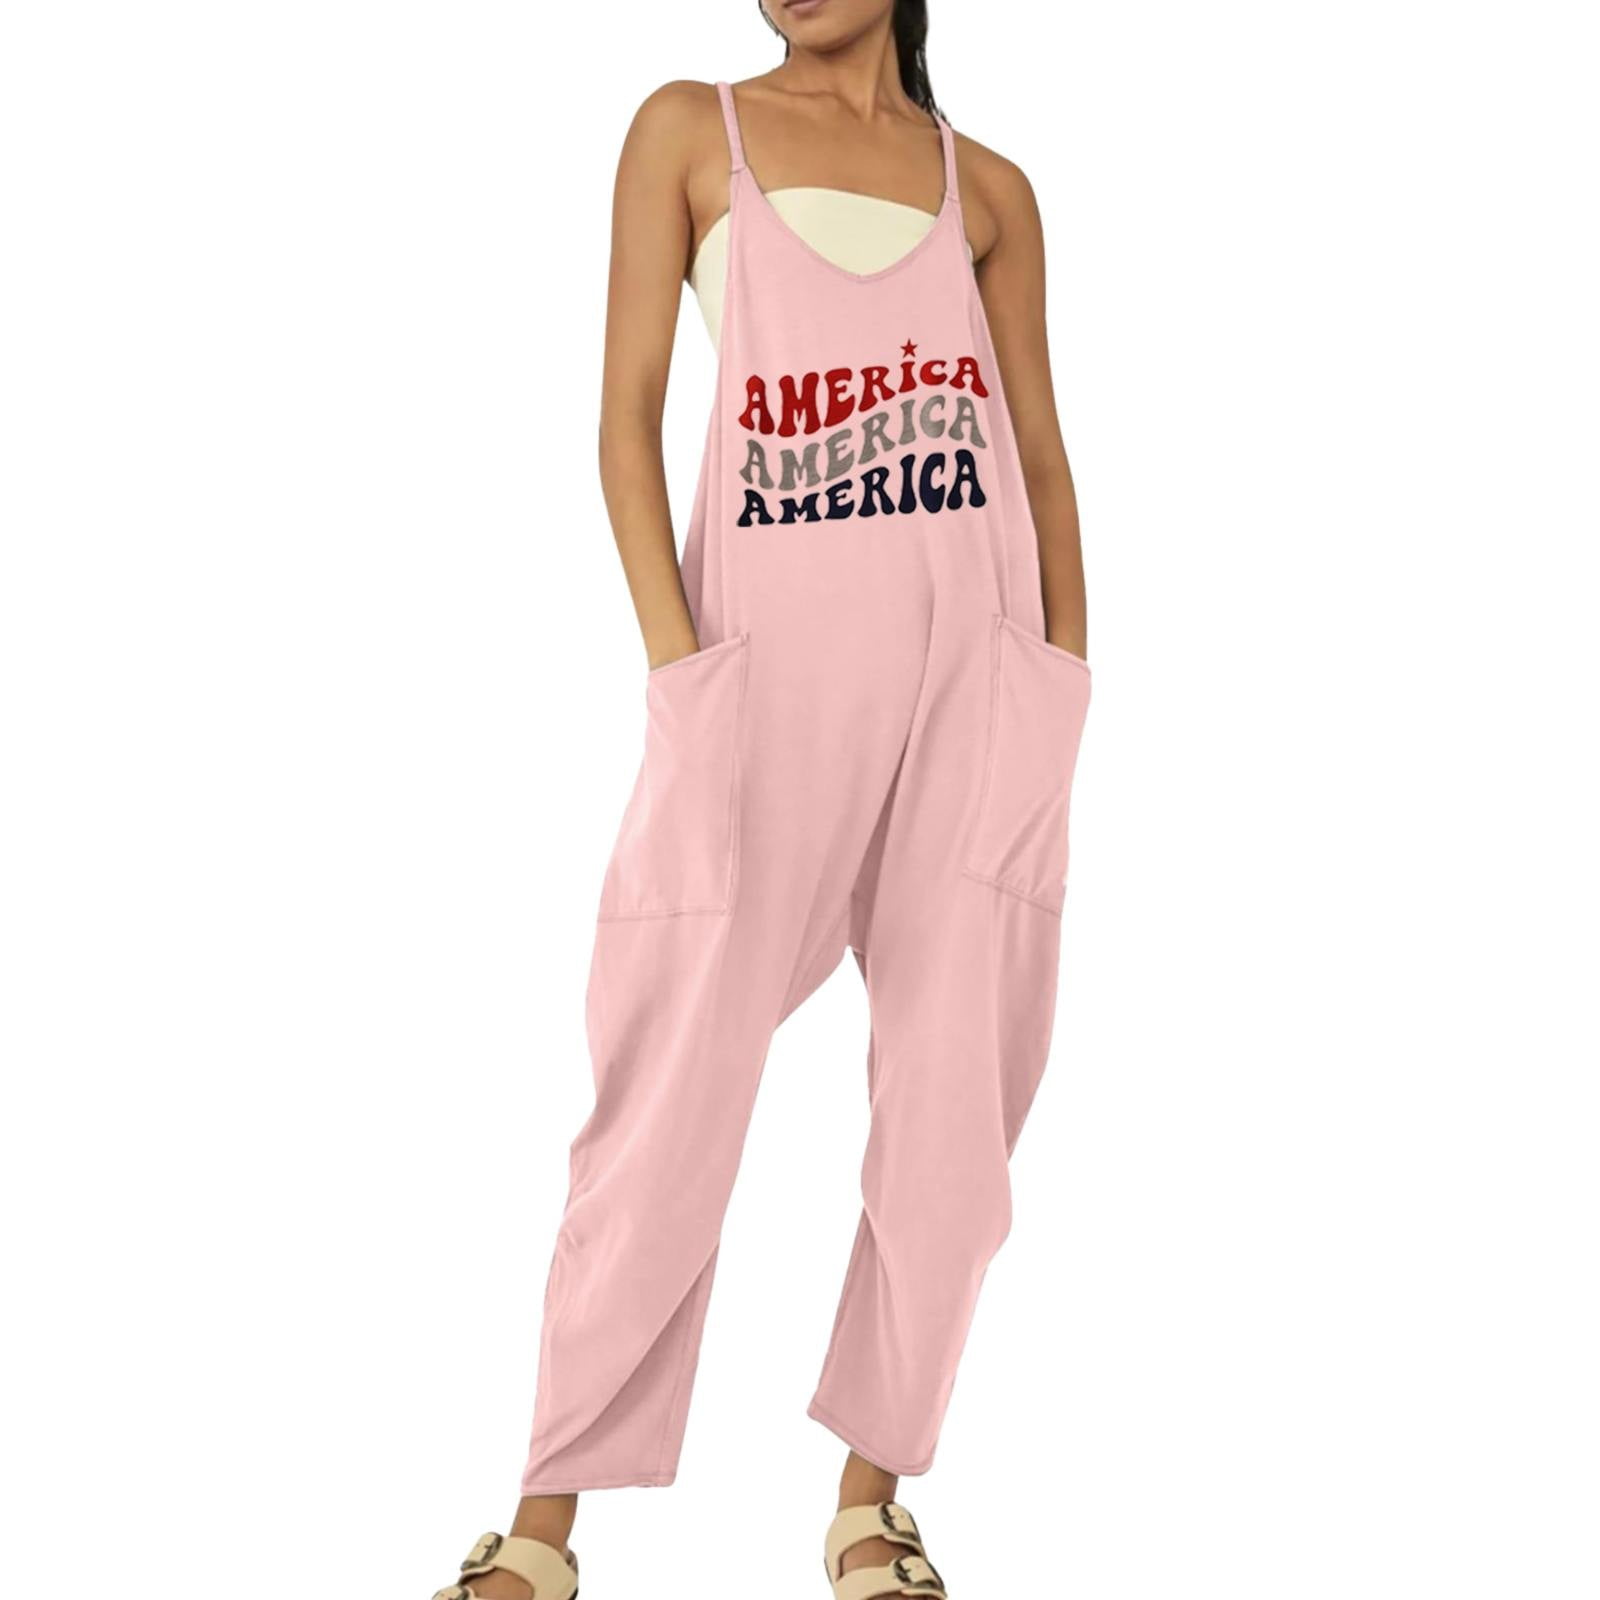 4th of July Plus Size One Piece Rompers,Independence Day Printed ...